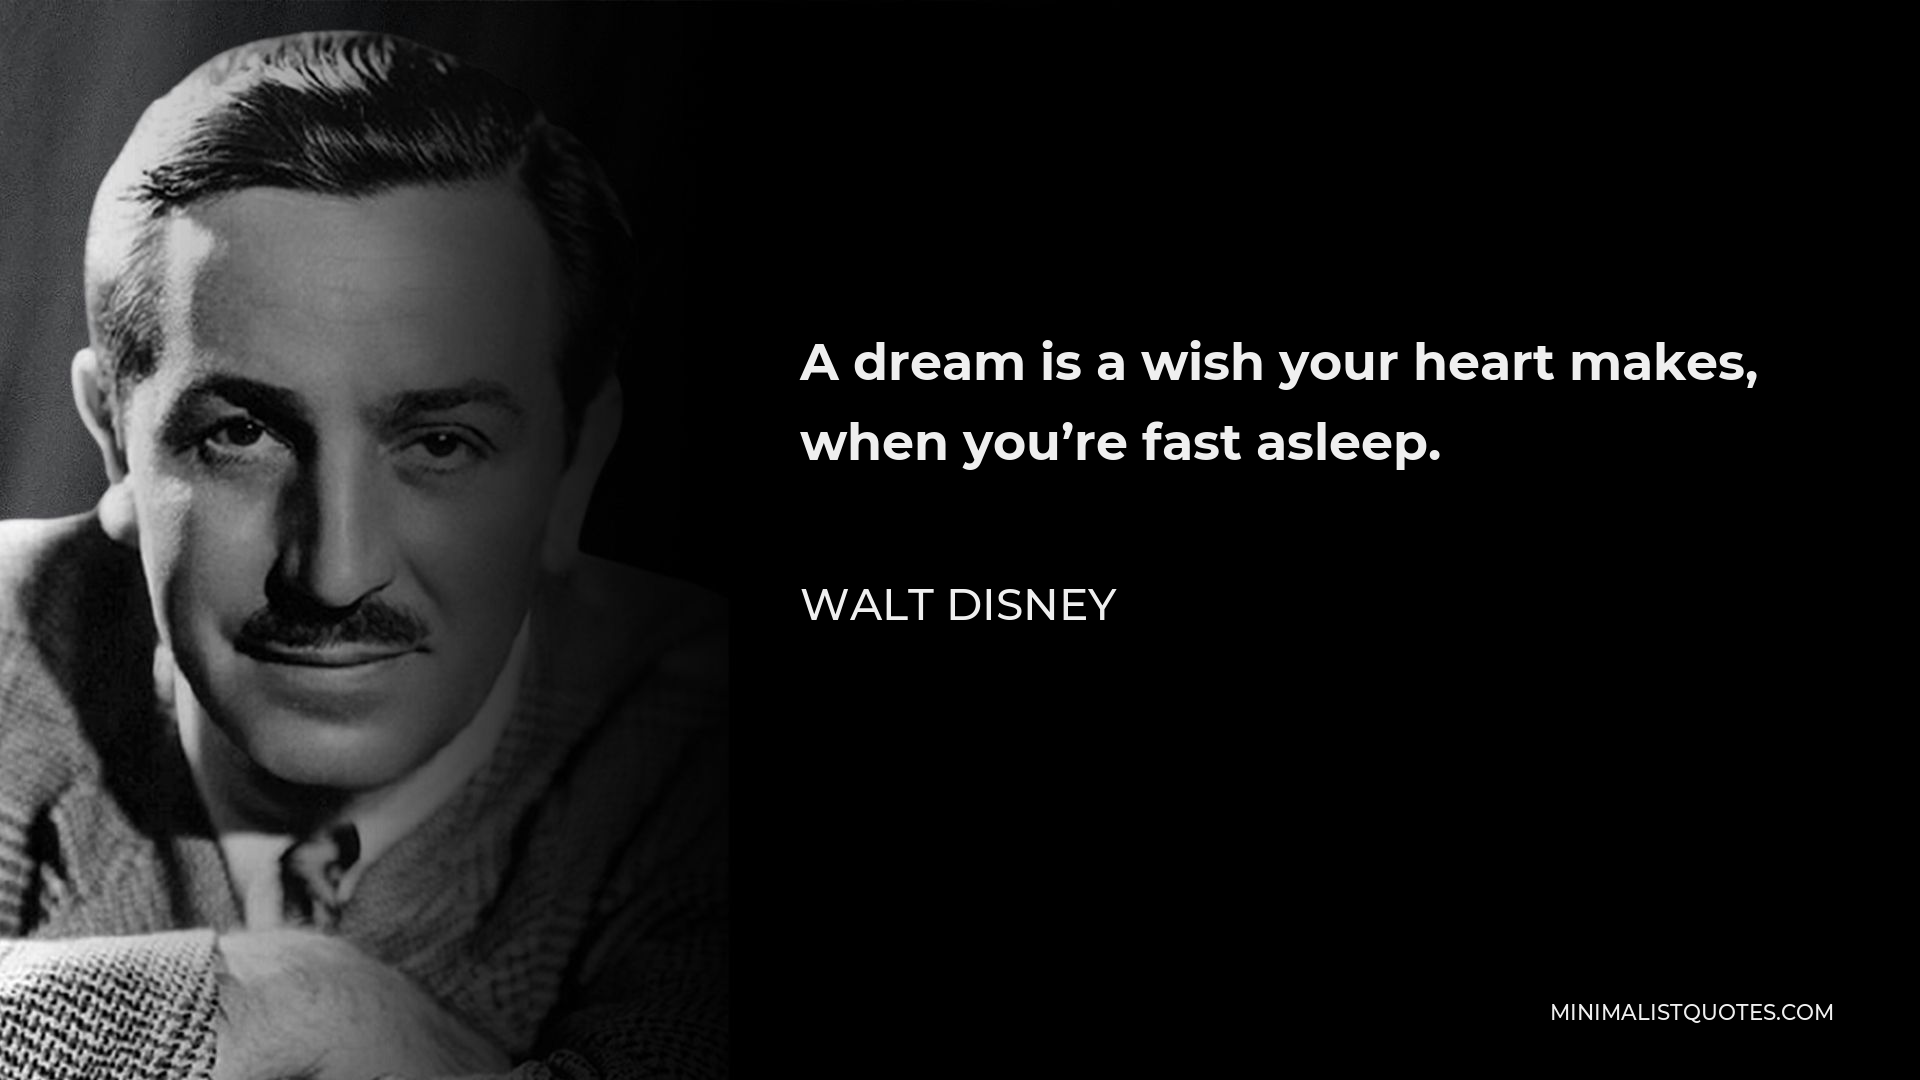 Walt Disney Quote - A dream is a wish your heart makes, when you’re fast asleep.